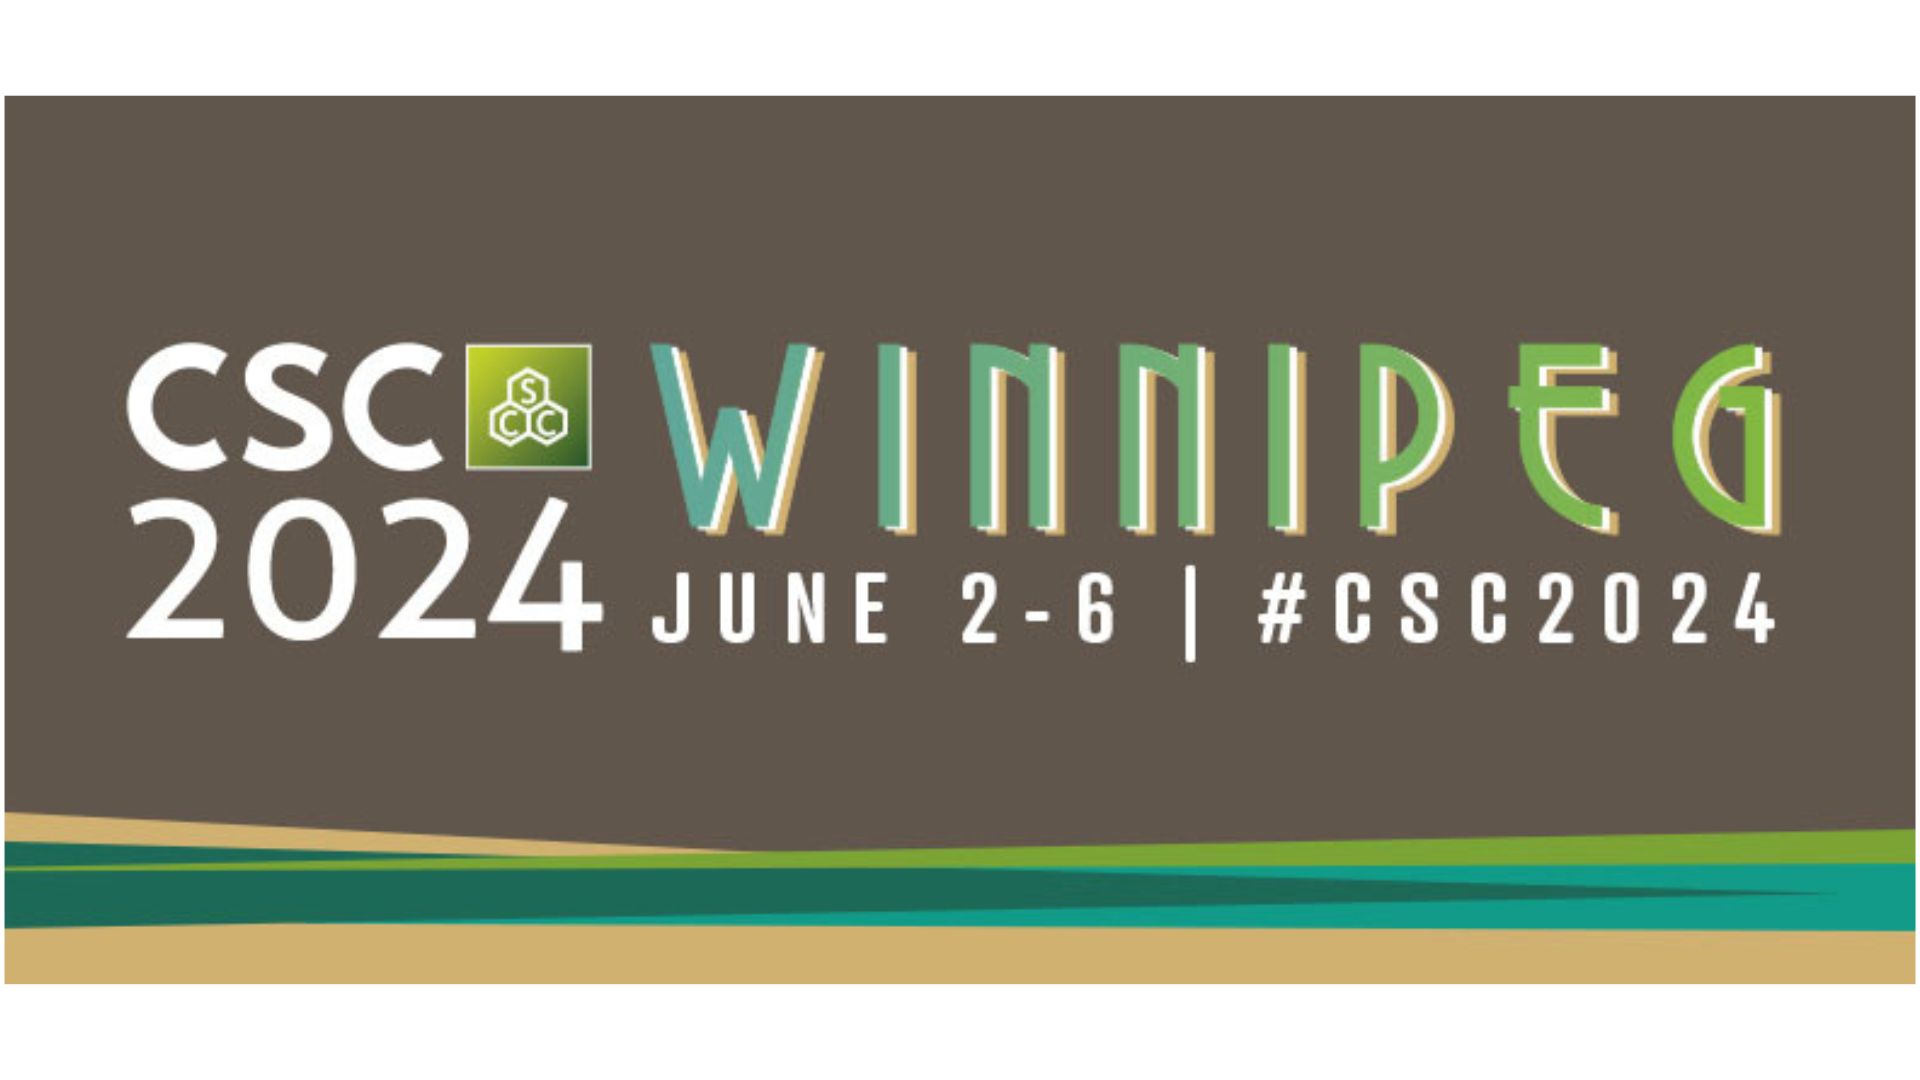 A brown banner with green and tan elements a the bottom. White text reads: CSC 2024 with the CSC logo (a molecular design). Green capitalized text reads Winnipeg, followed by white text reading: June 2-6, #CSC2024